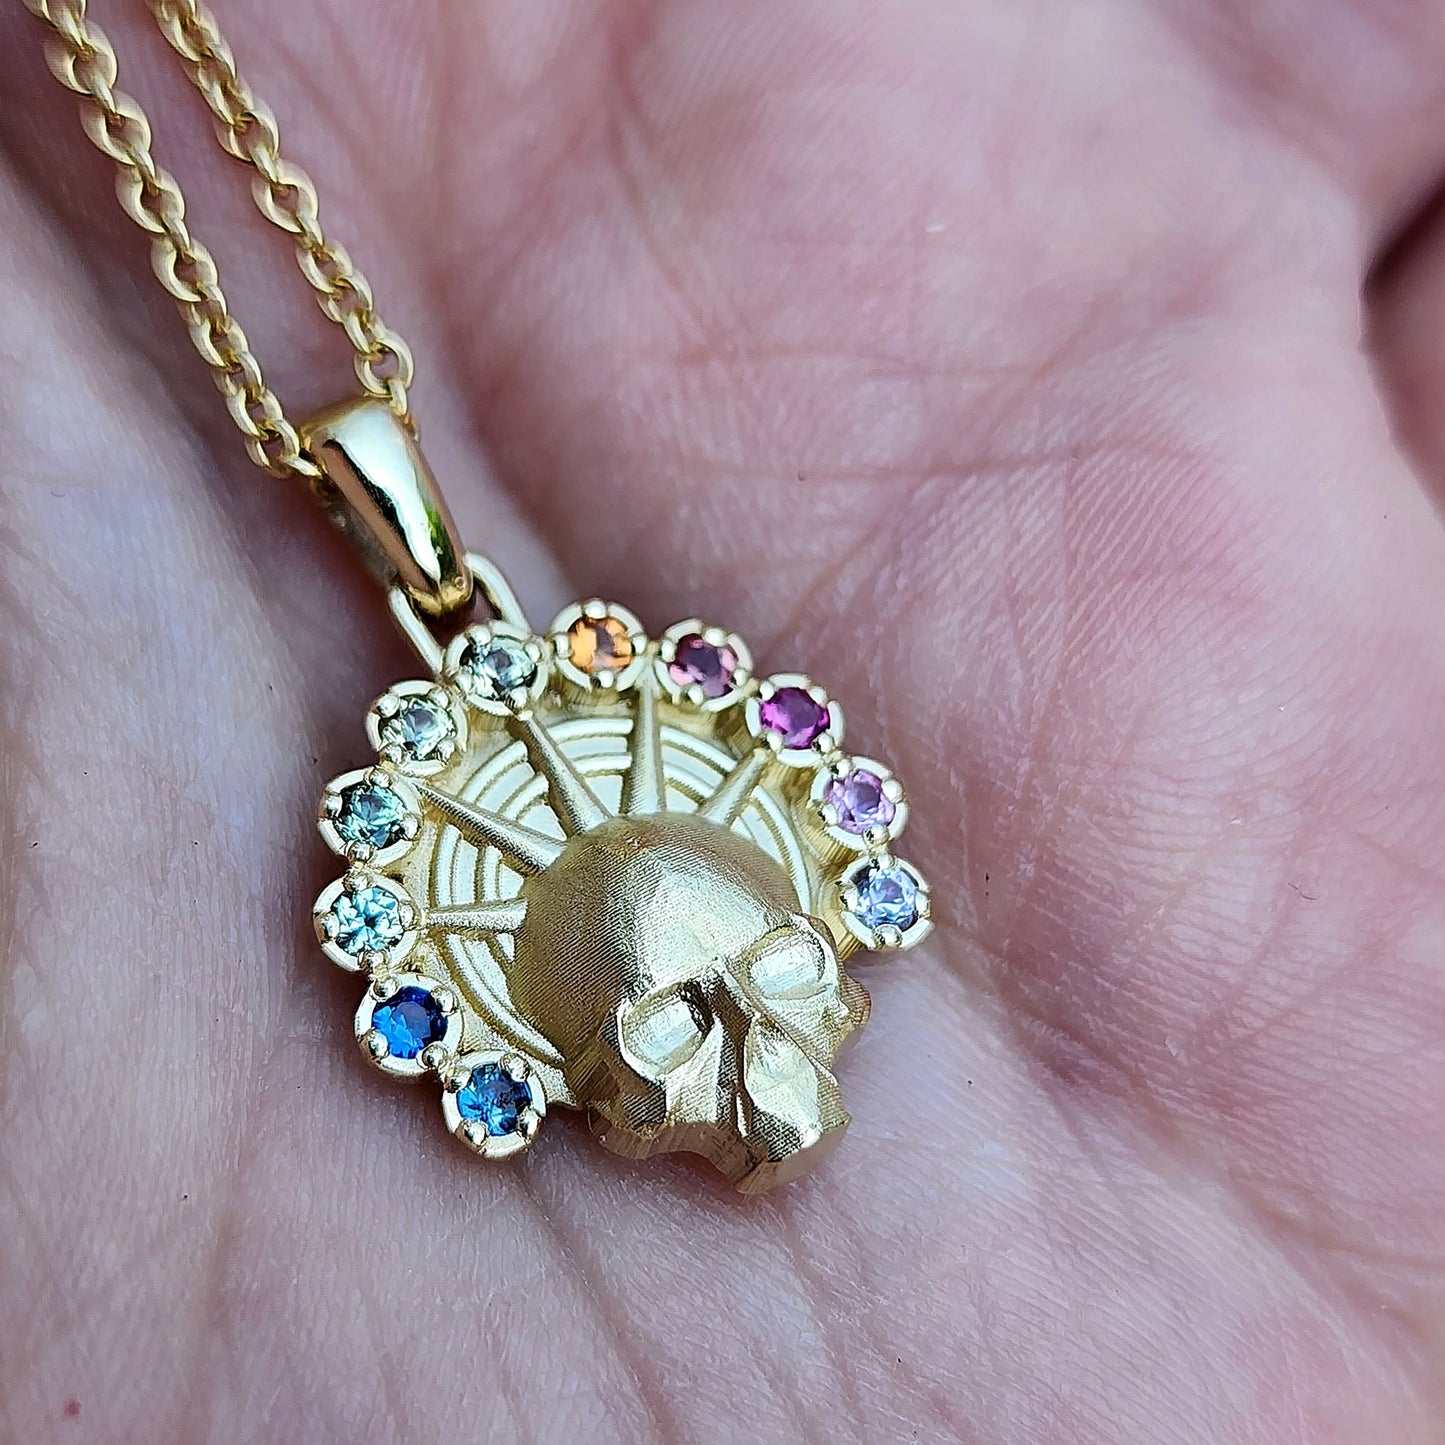 Rainbow Aura Angel Pendant - Catacomb Memento Mori Gold Skull Necklace with Natural Sapphires - Gothic Fine Jewelry